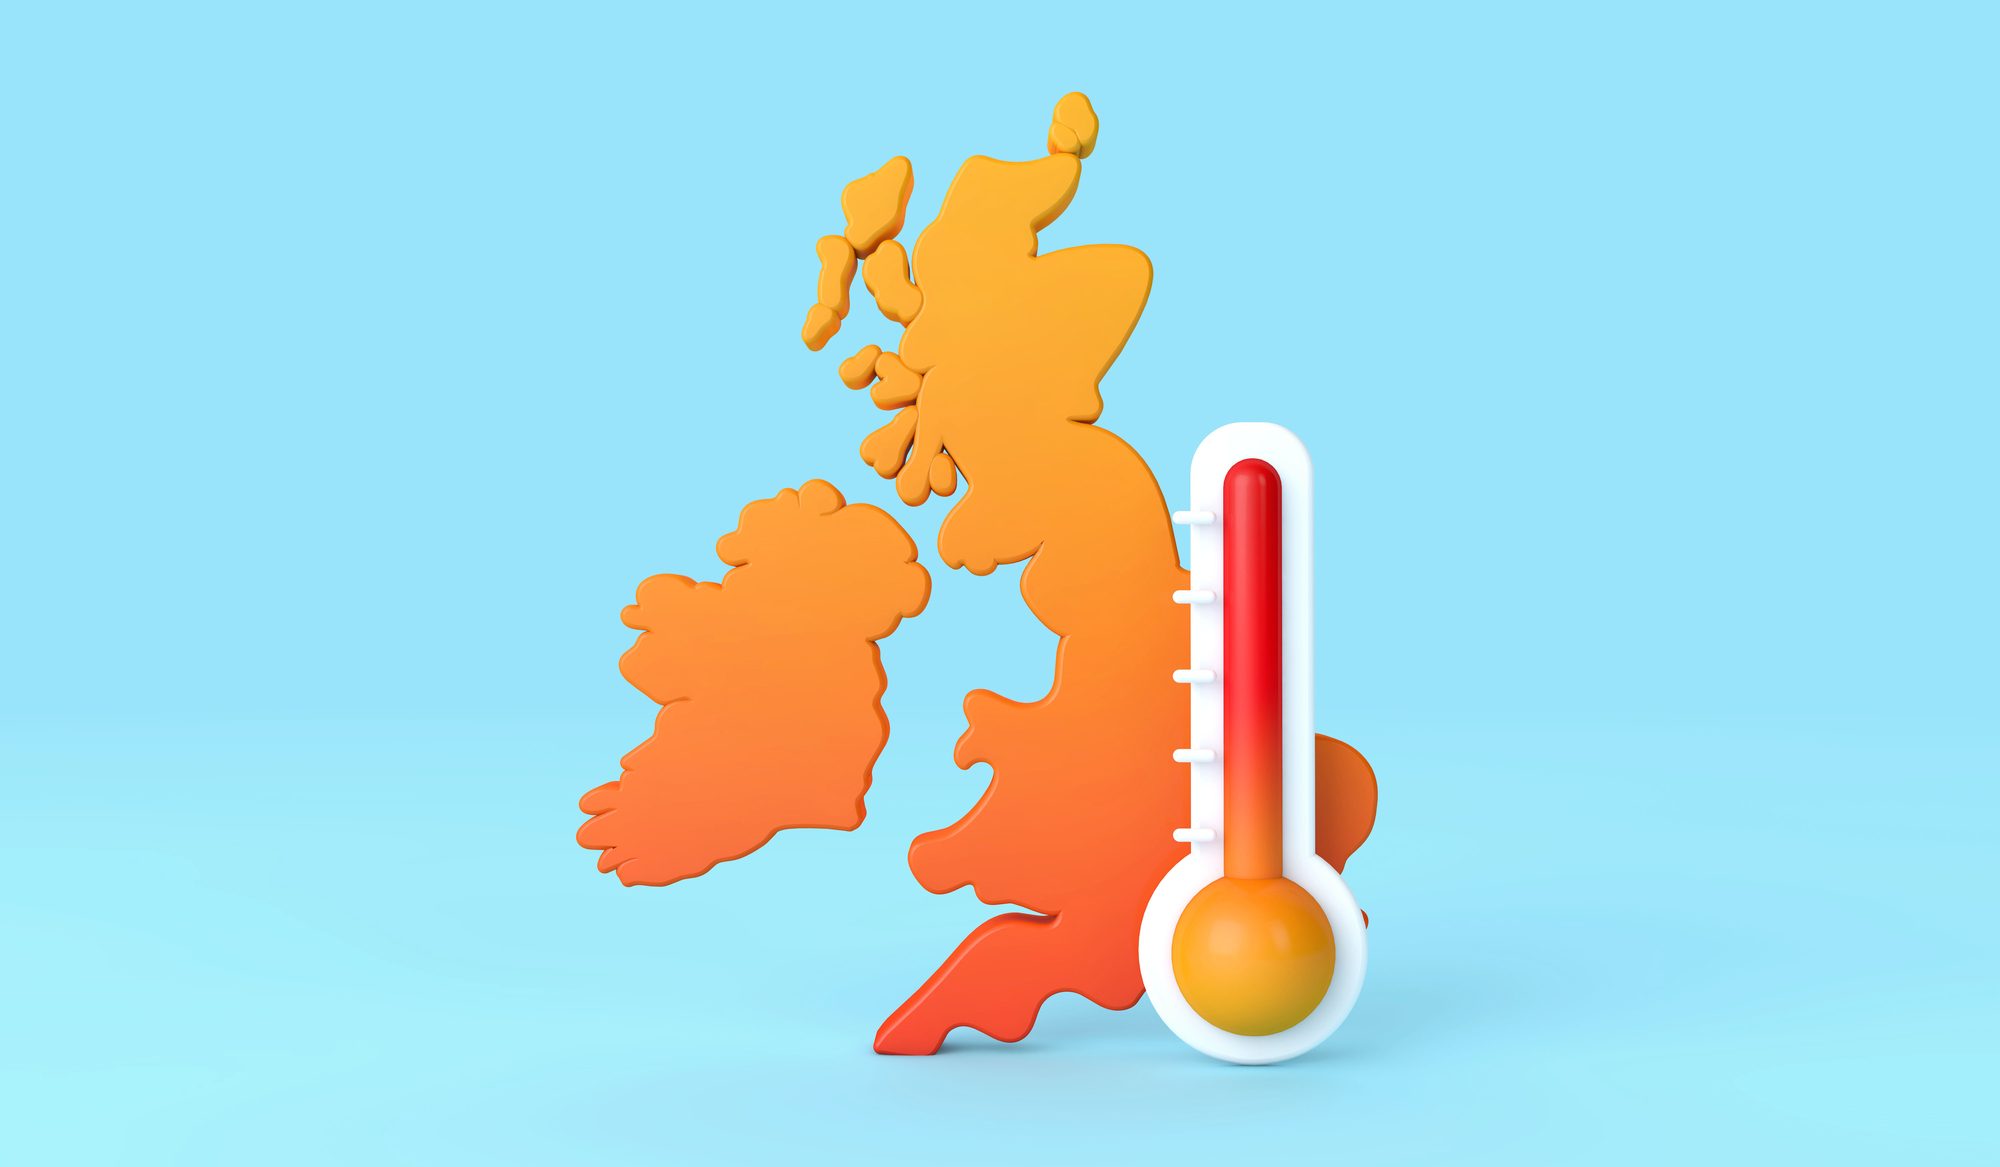 British Isles coloured orange-red with a thermometer